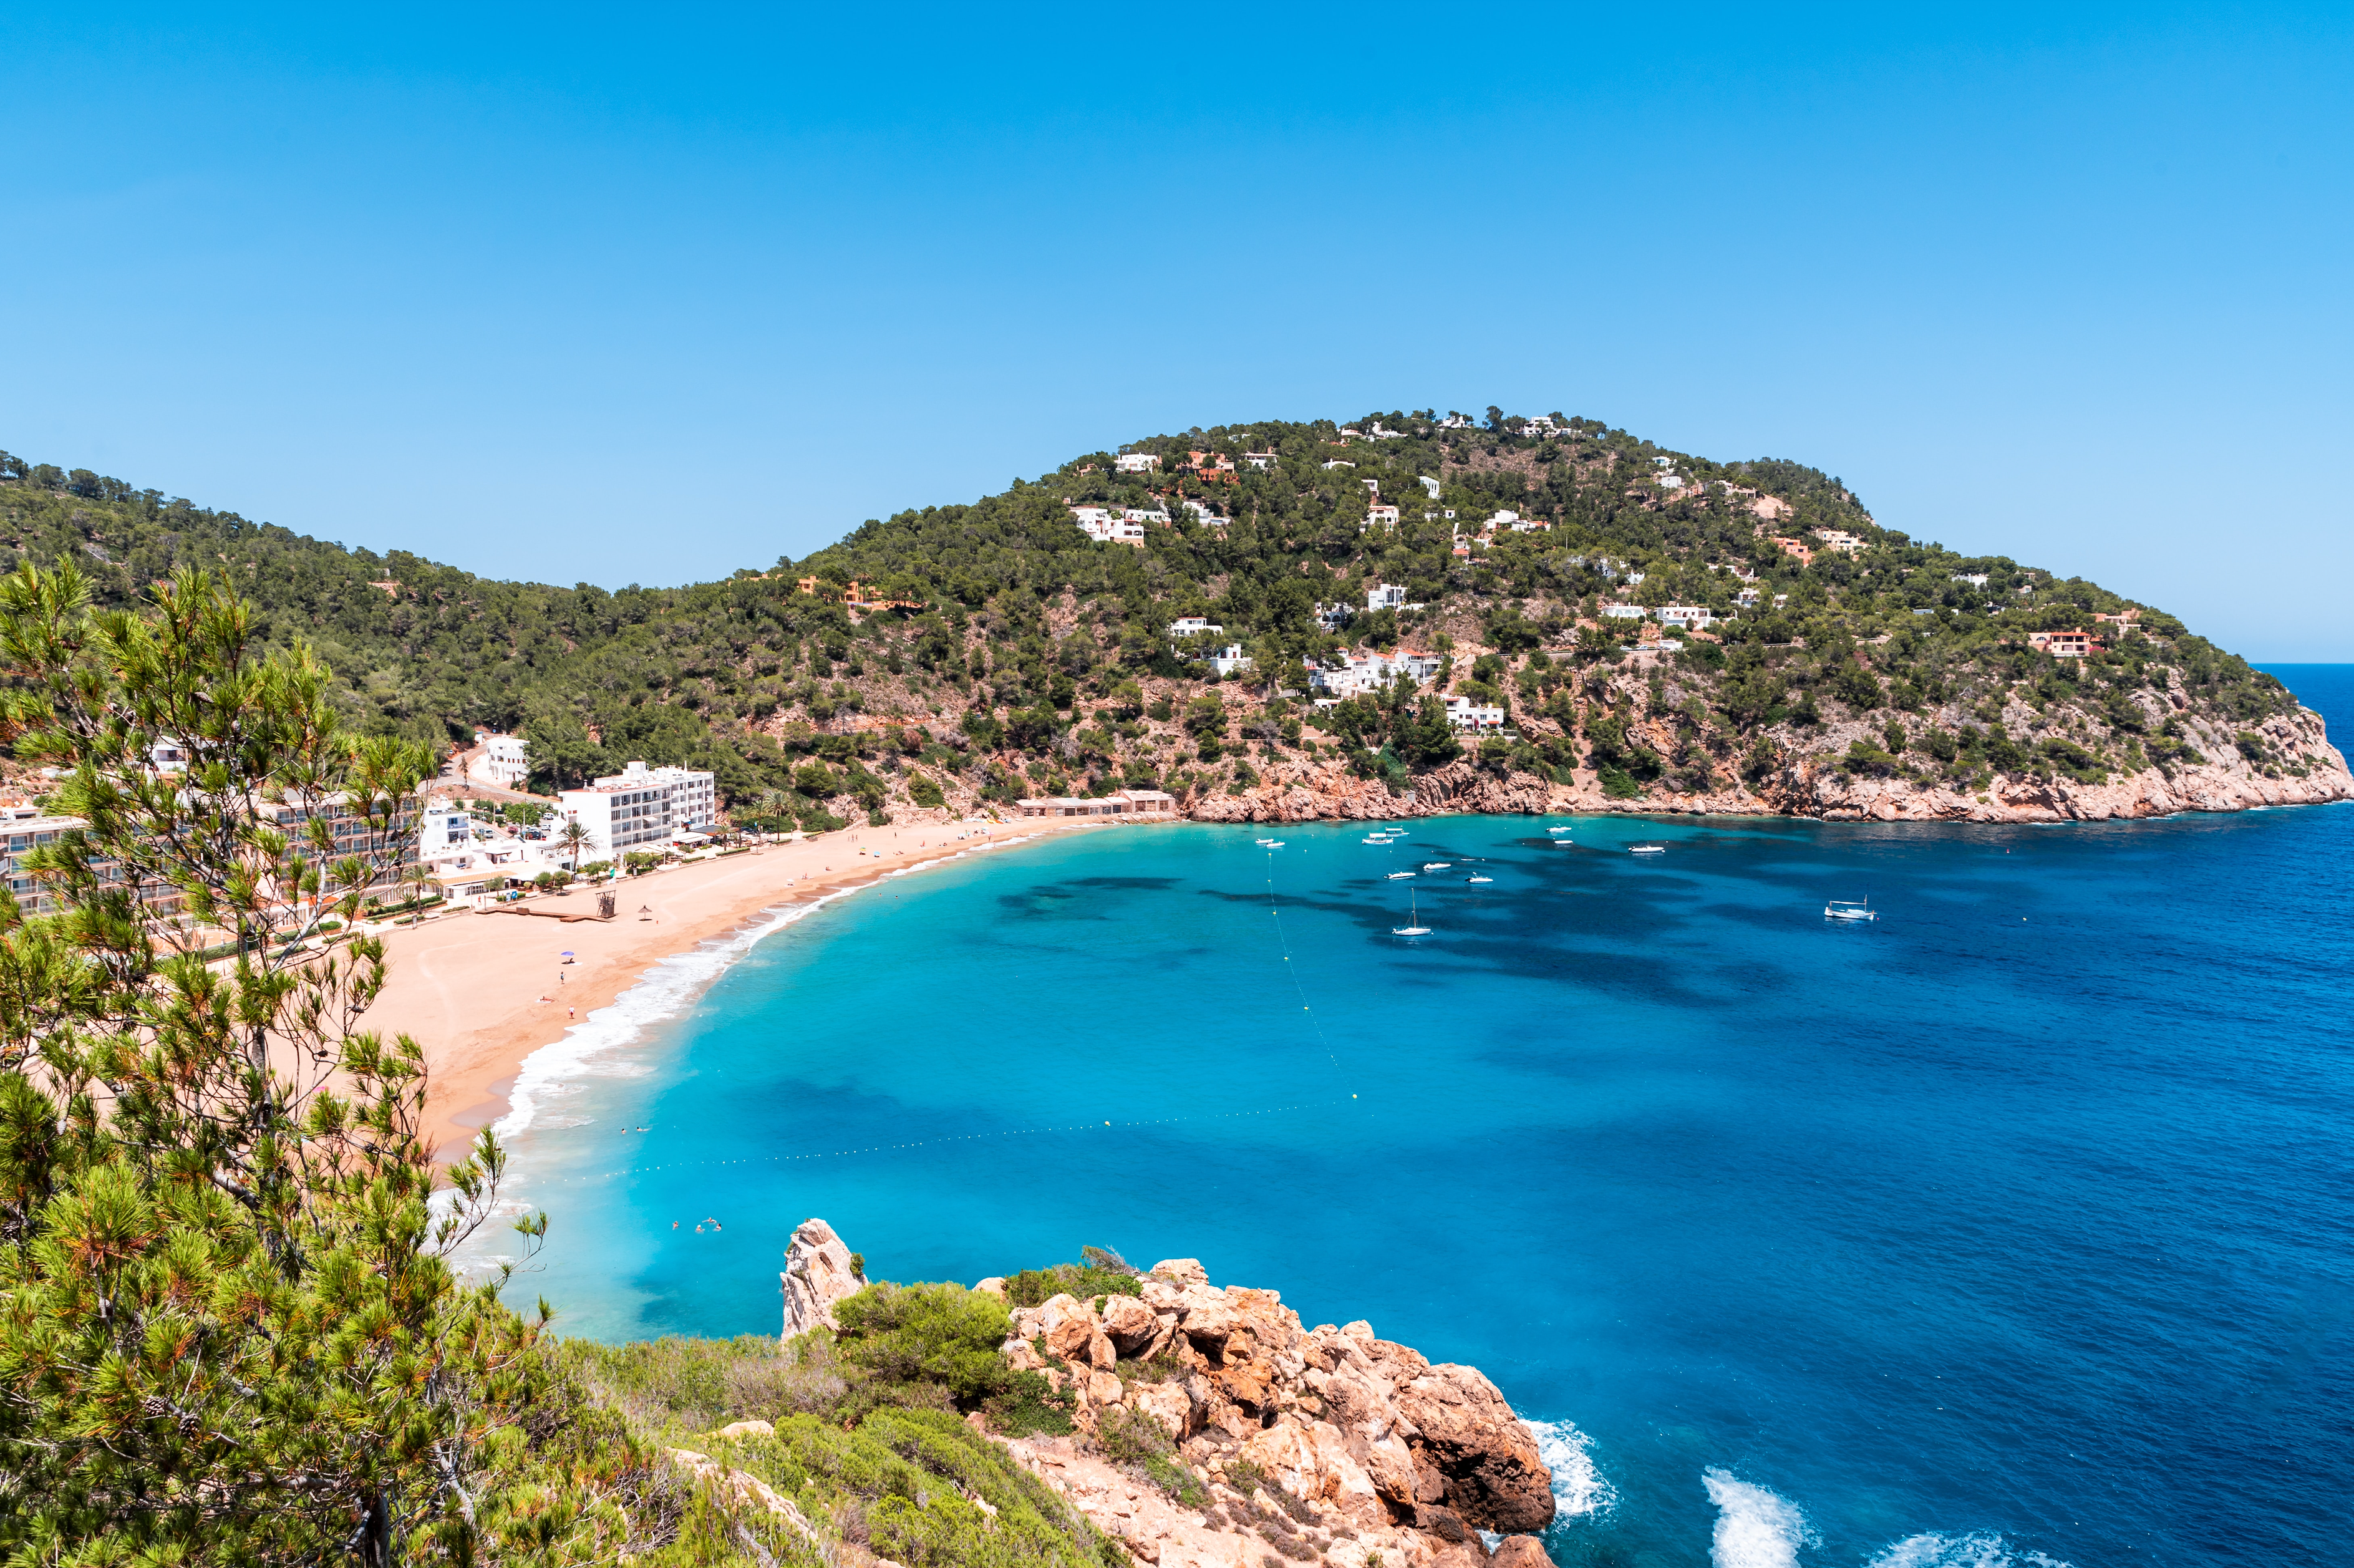 Monthly Breakdown for Visiting Ibiza